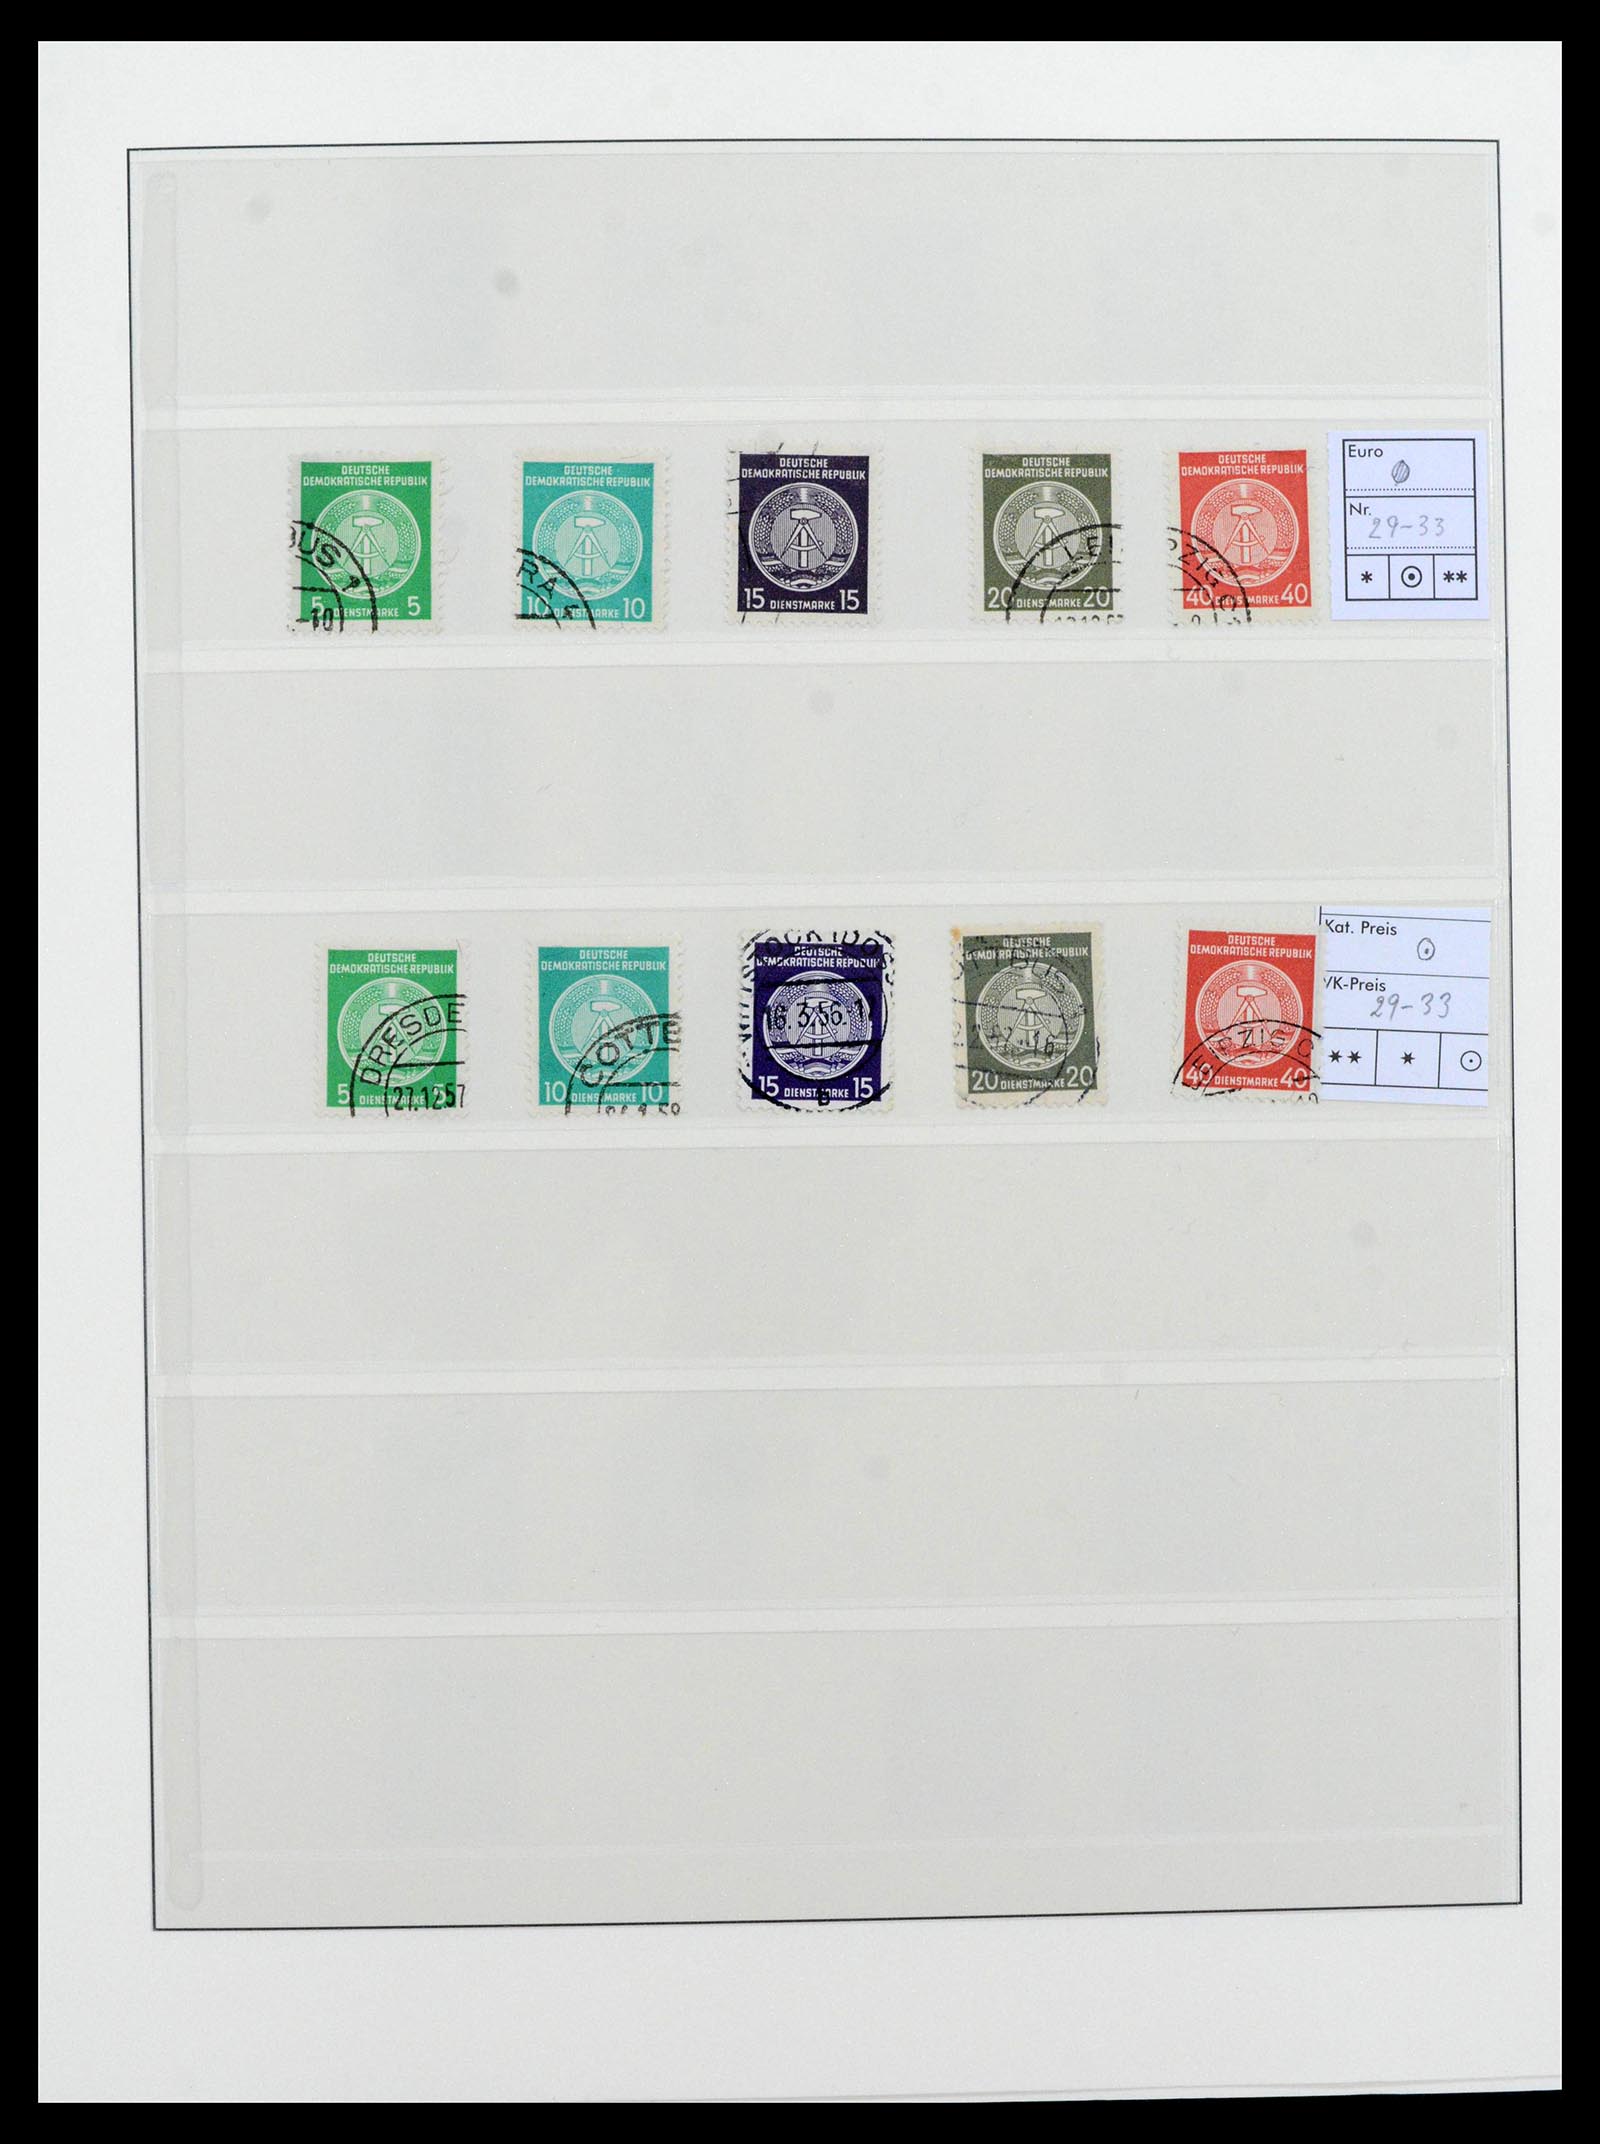 39376 0025 - Stamp collection 39376 GDR service stamps 1951-1965.